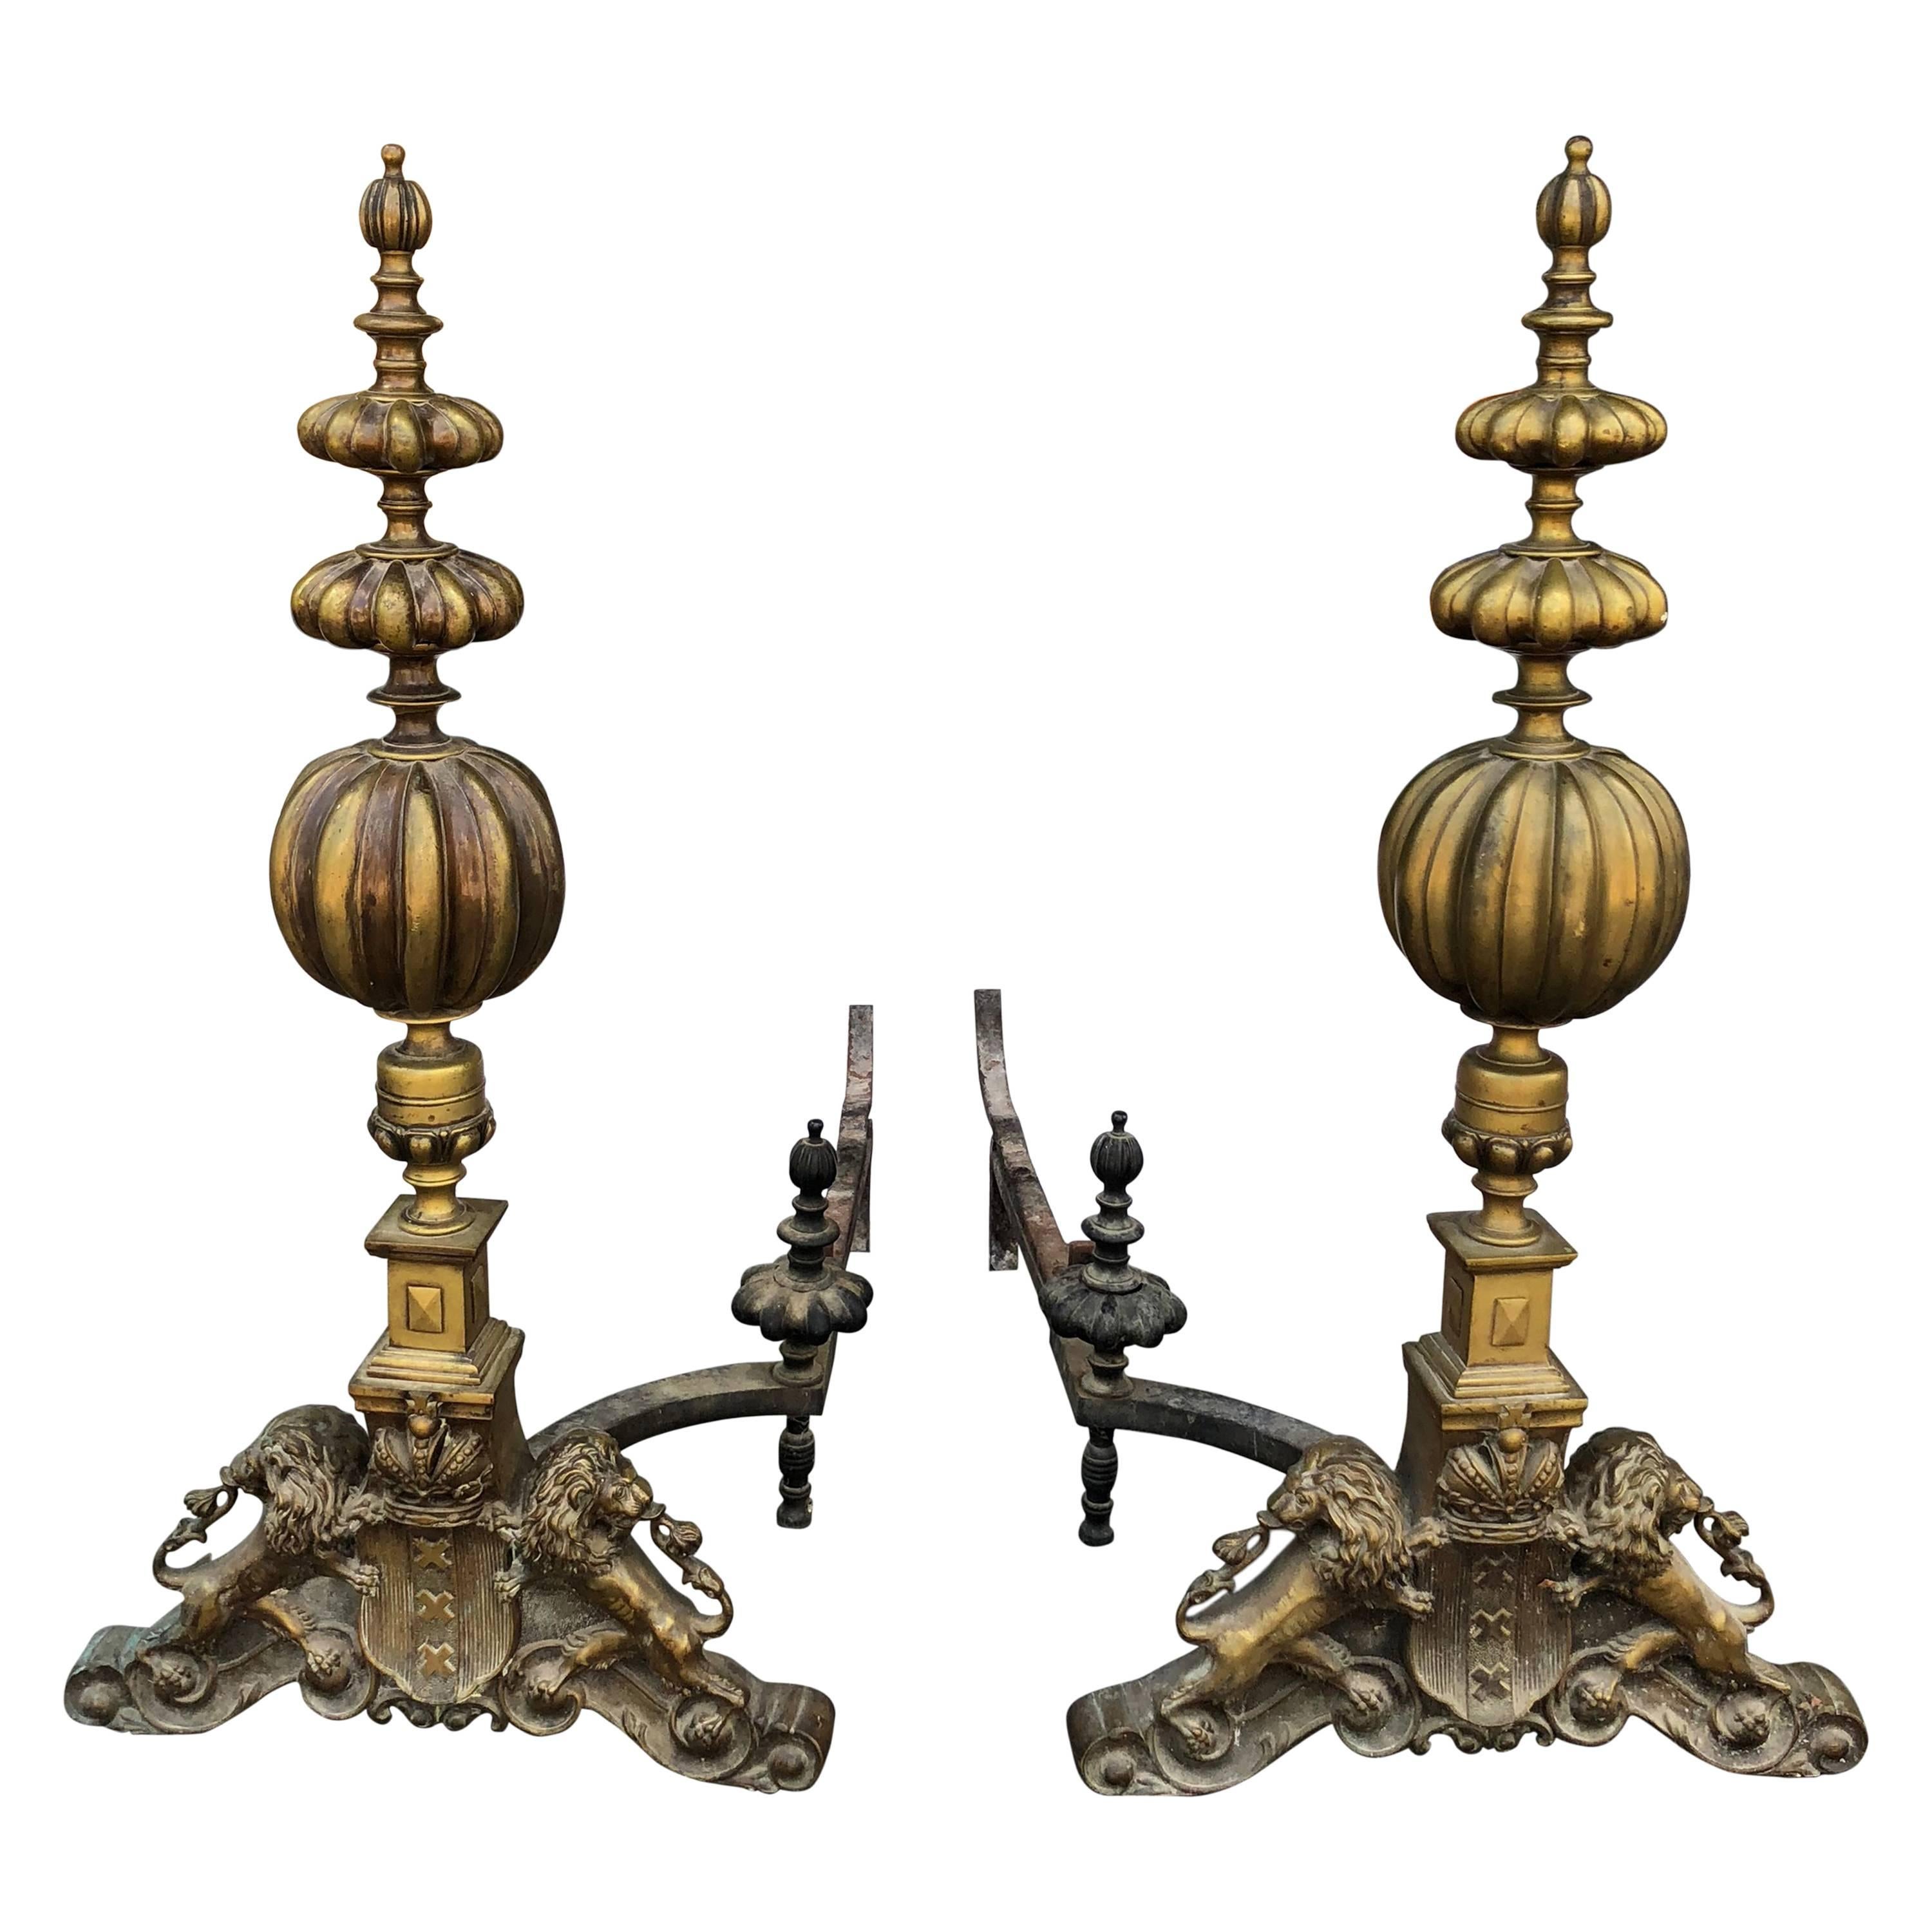 Ornate Brass Andirons with Lion Motif Early 19th Century